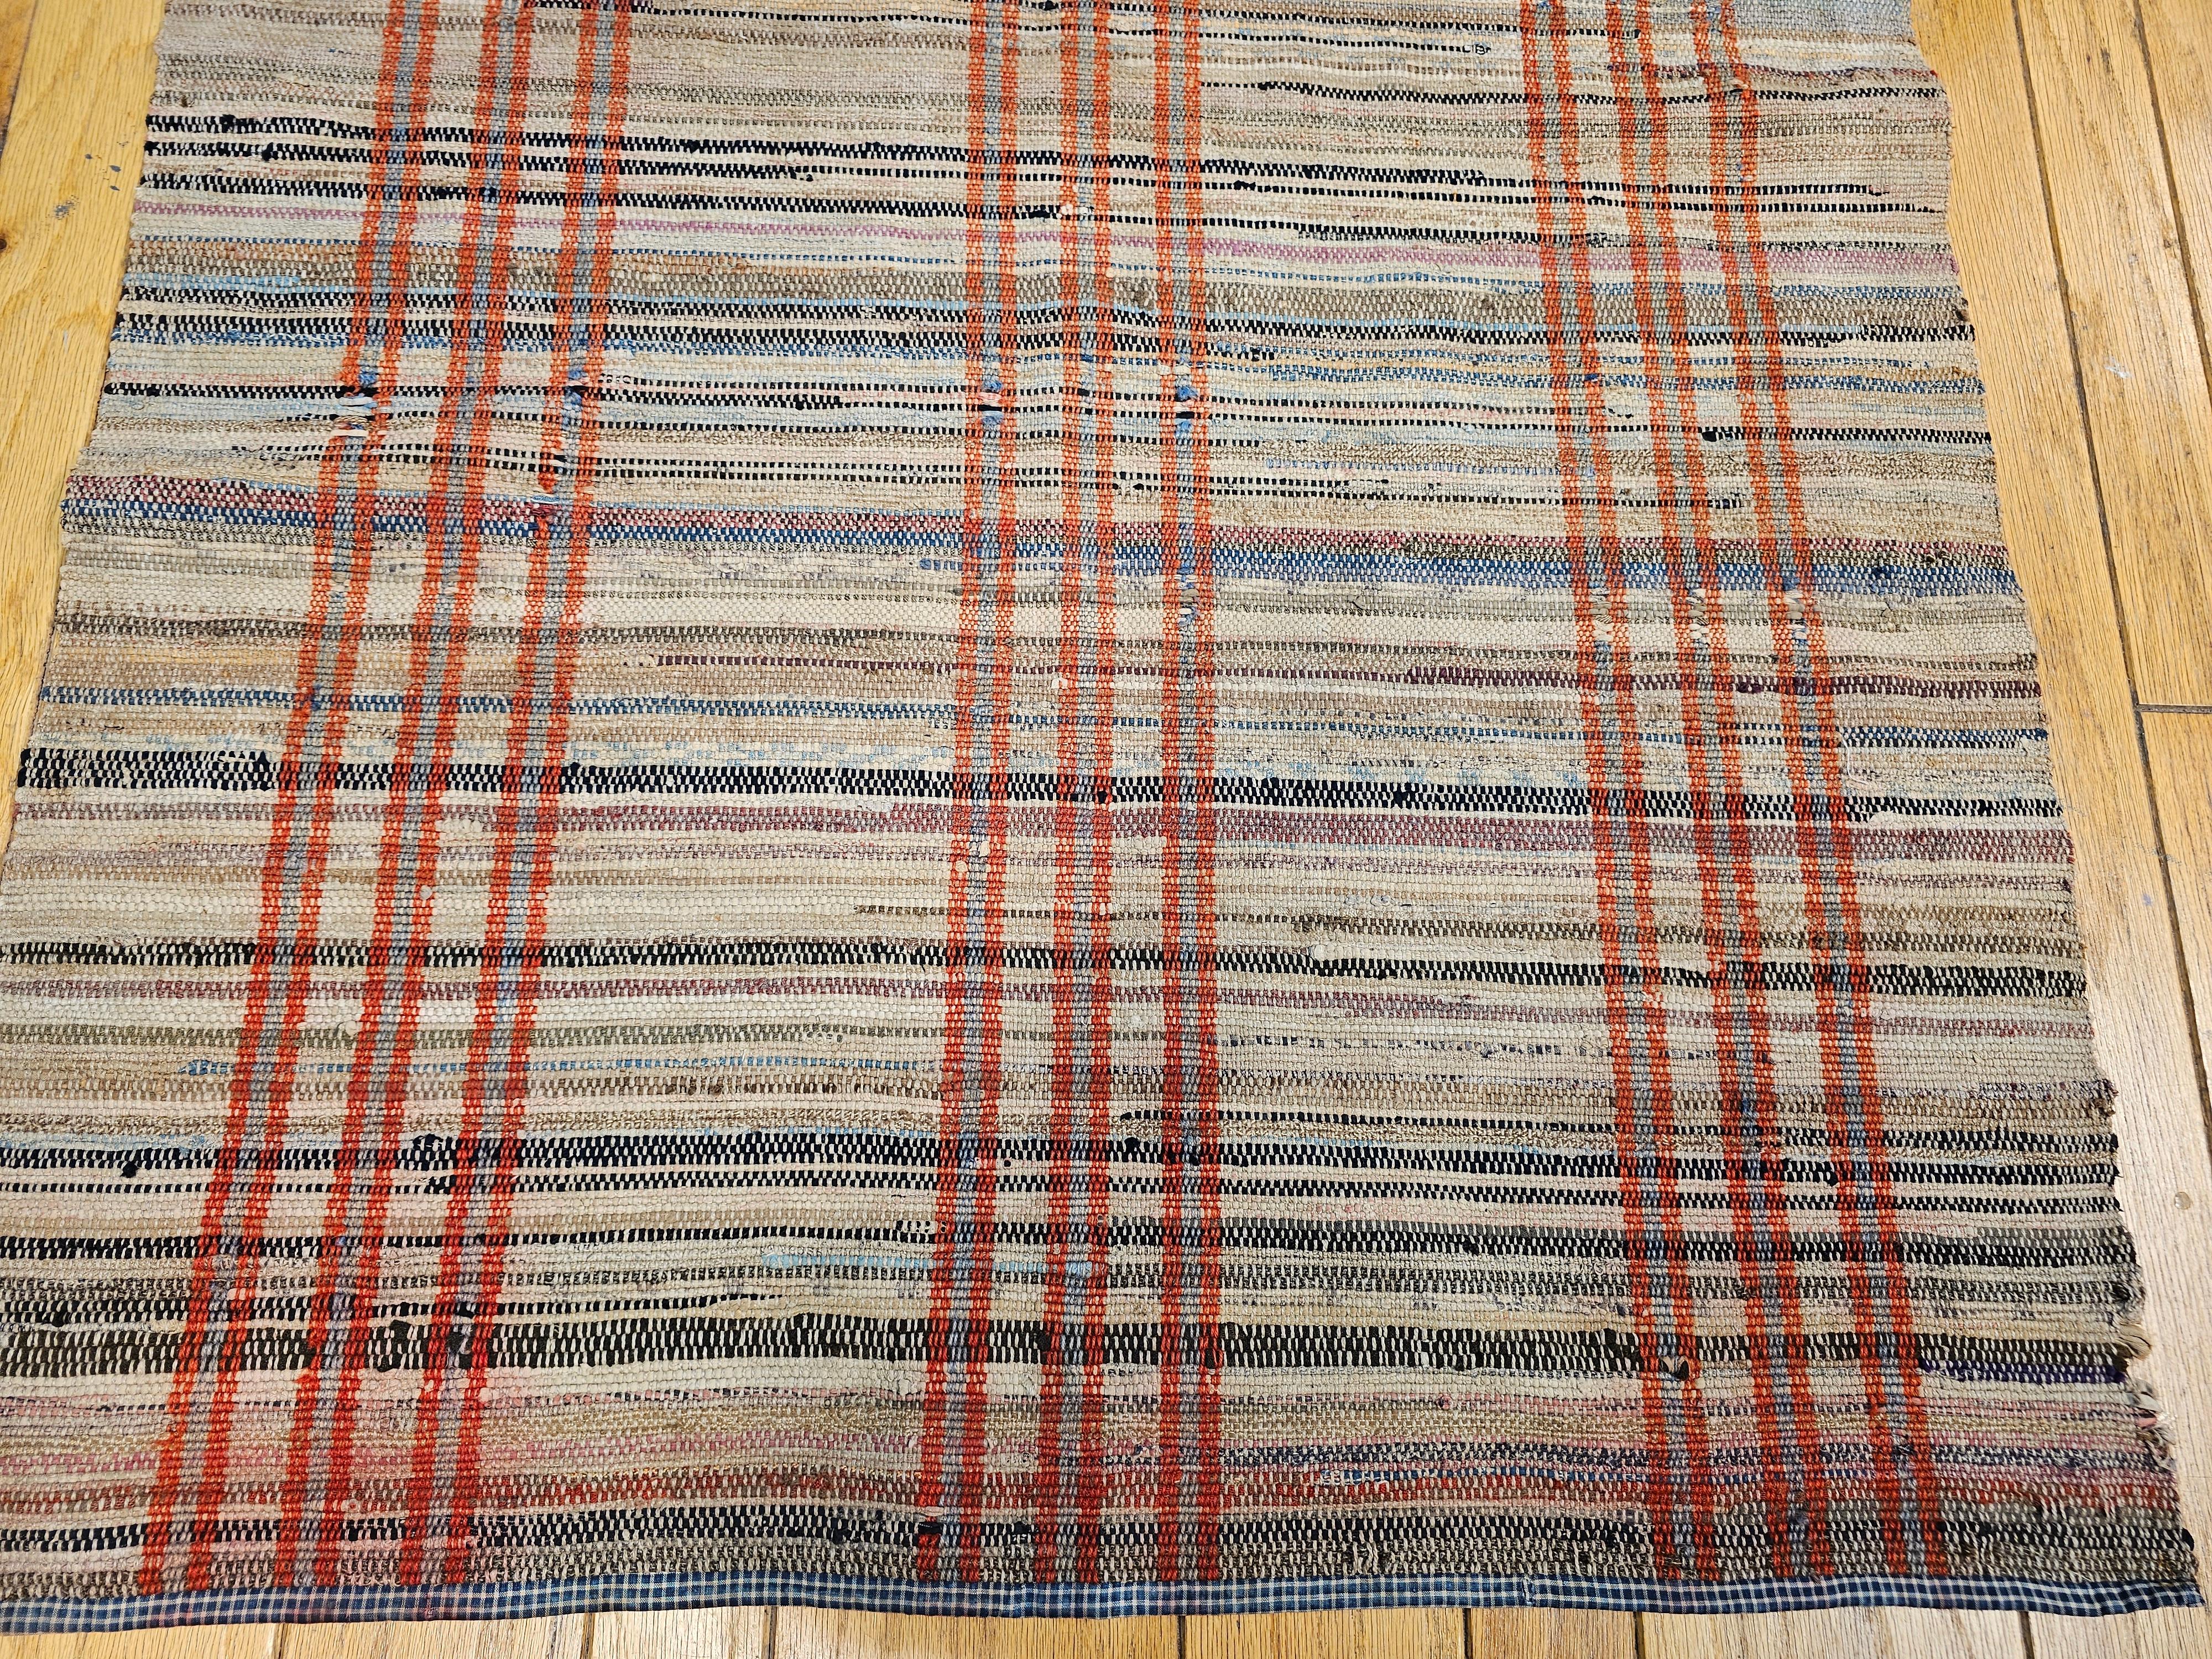 Vintage American Rag Runner in Tan with Stripe Pattern in Red, Pale Blue For Sale 5